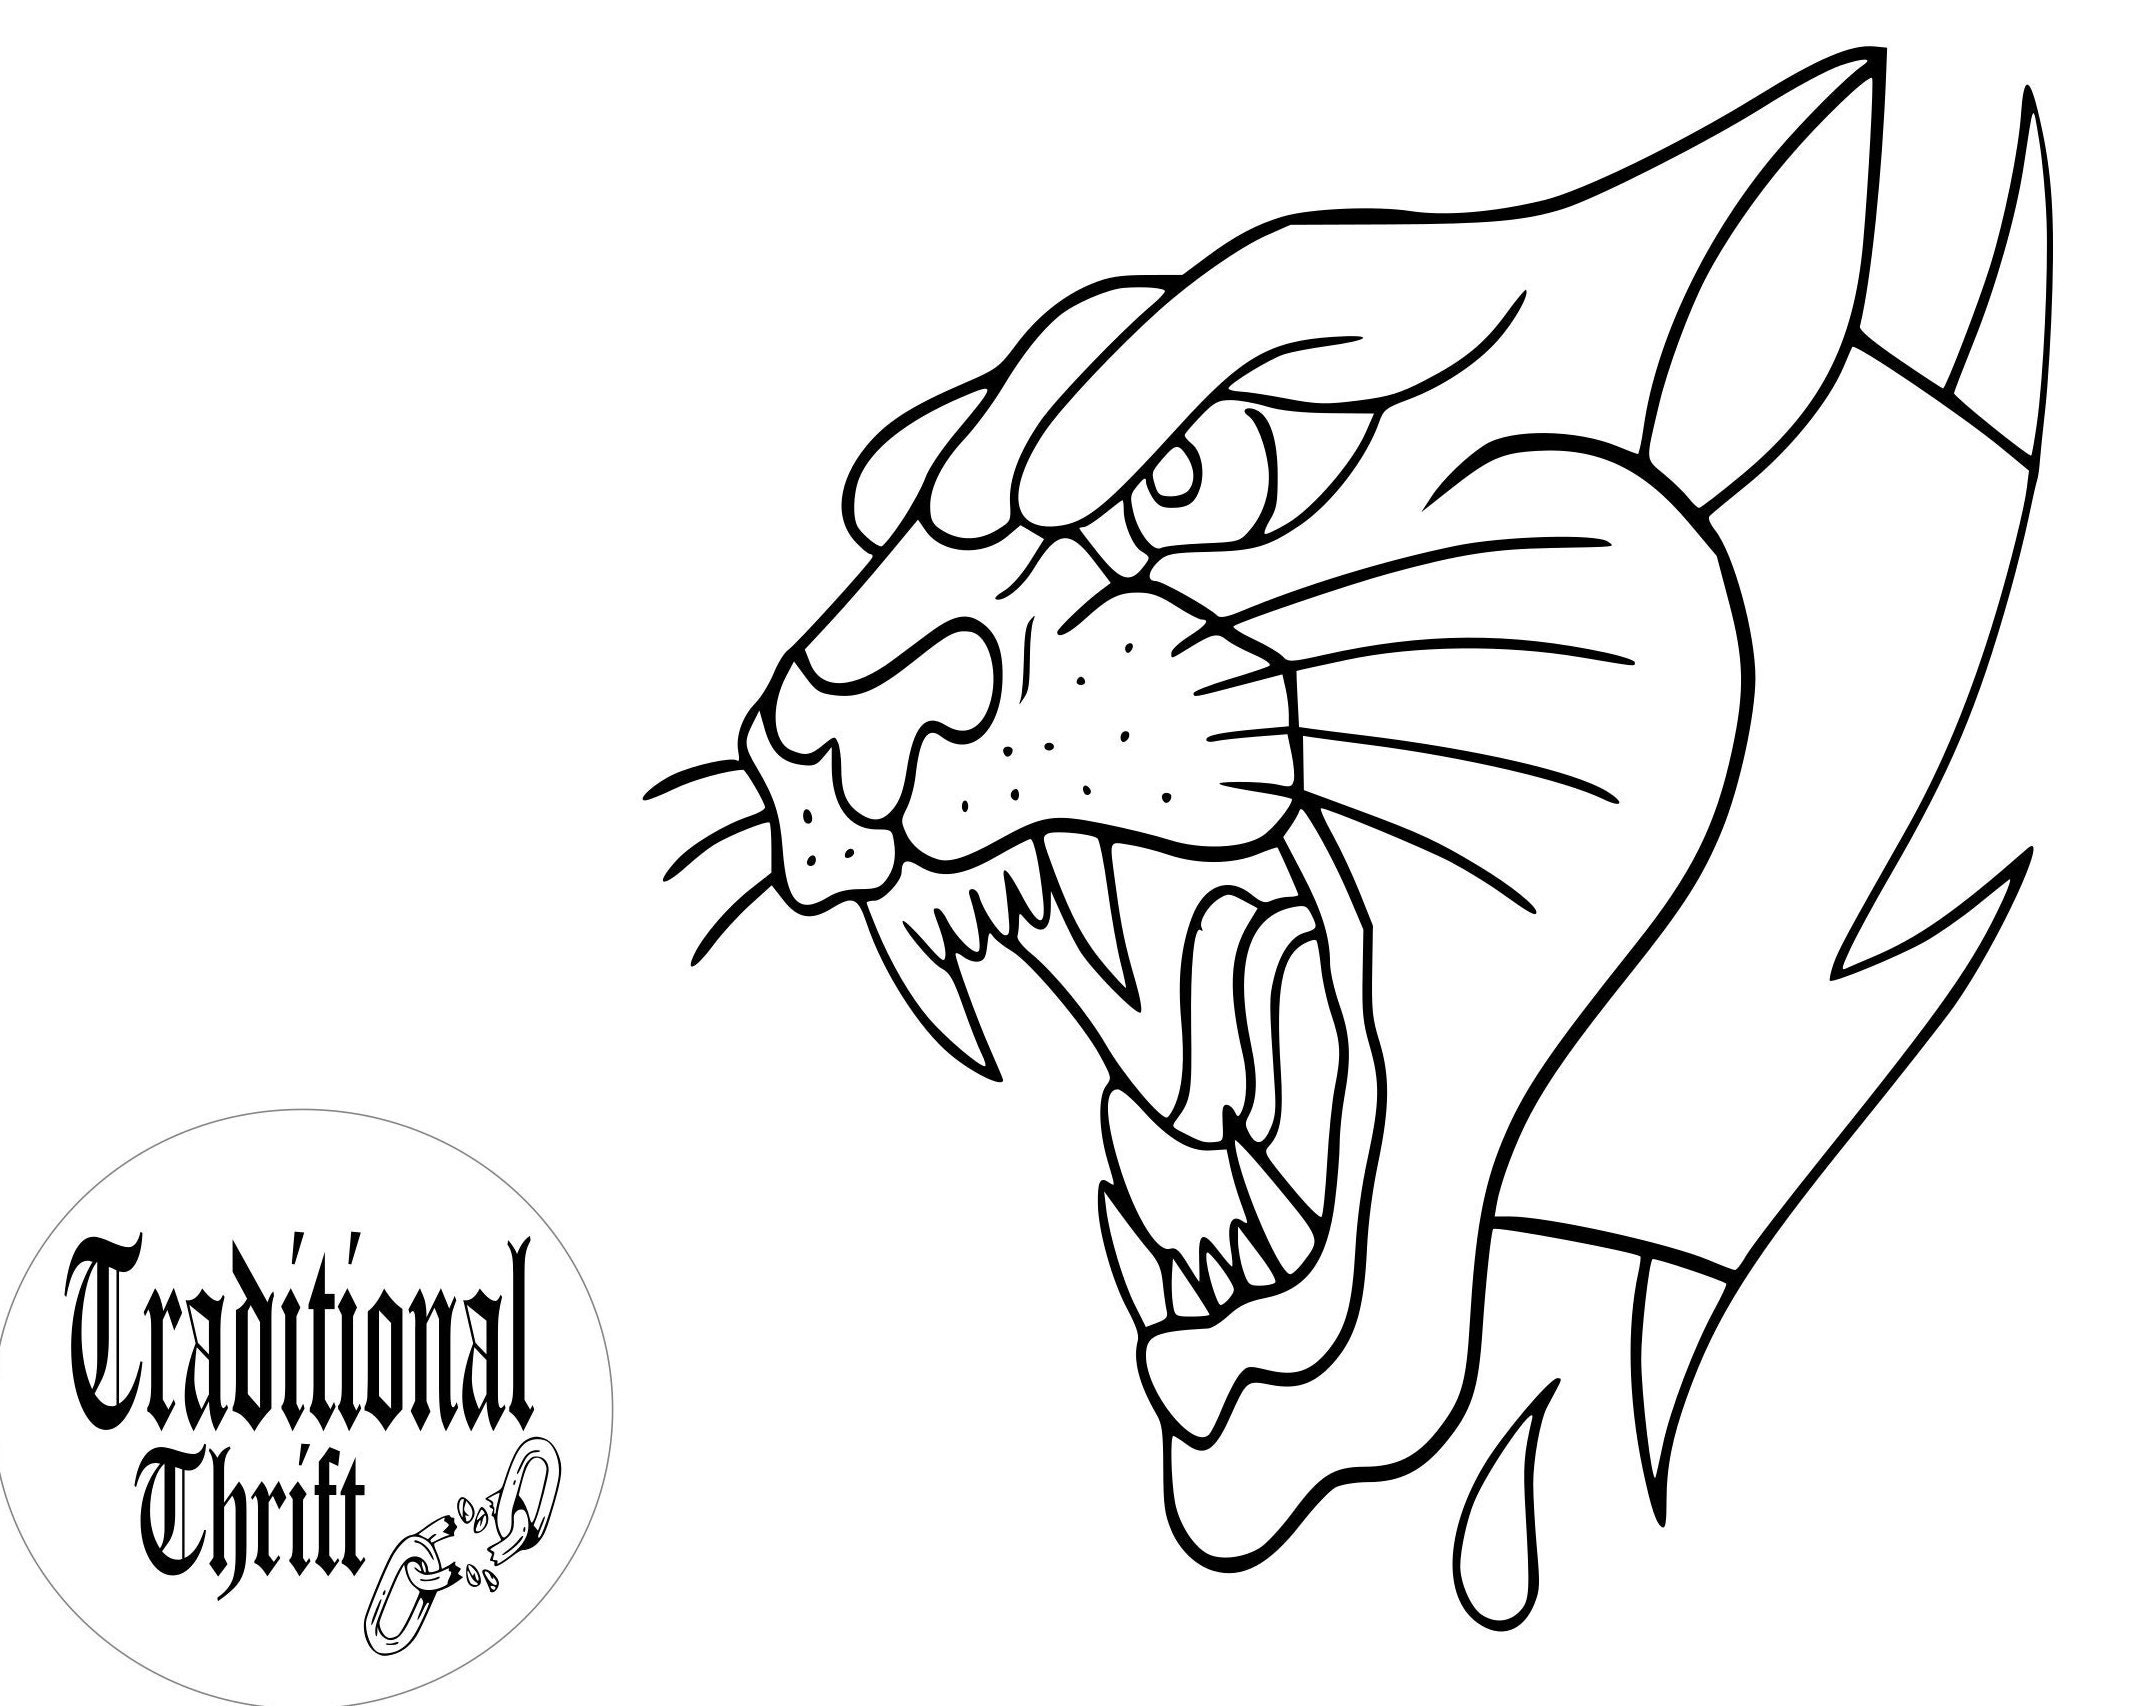 Panther Tattoo Designs and Meanings  TatRing